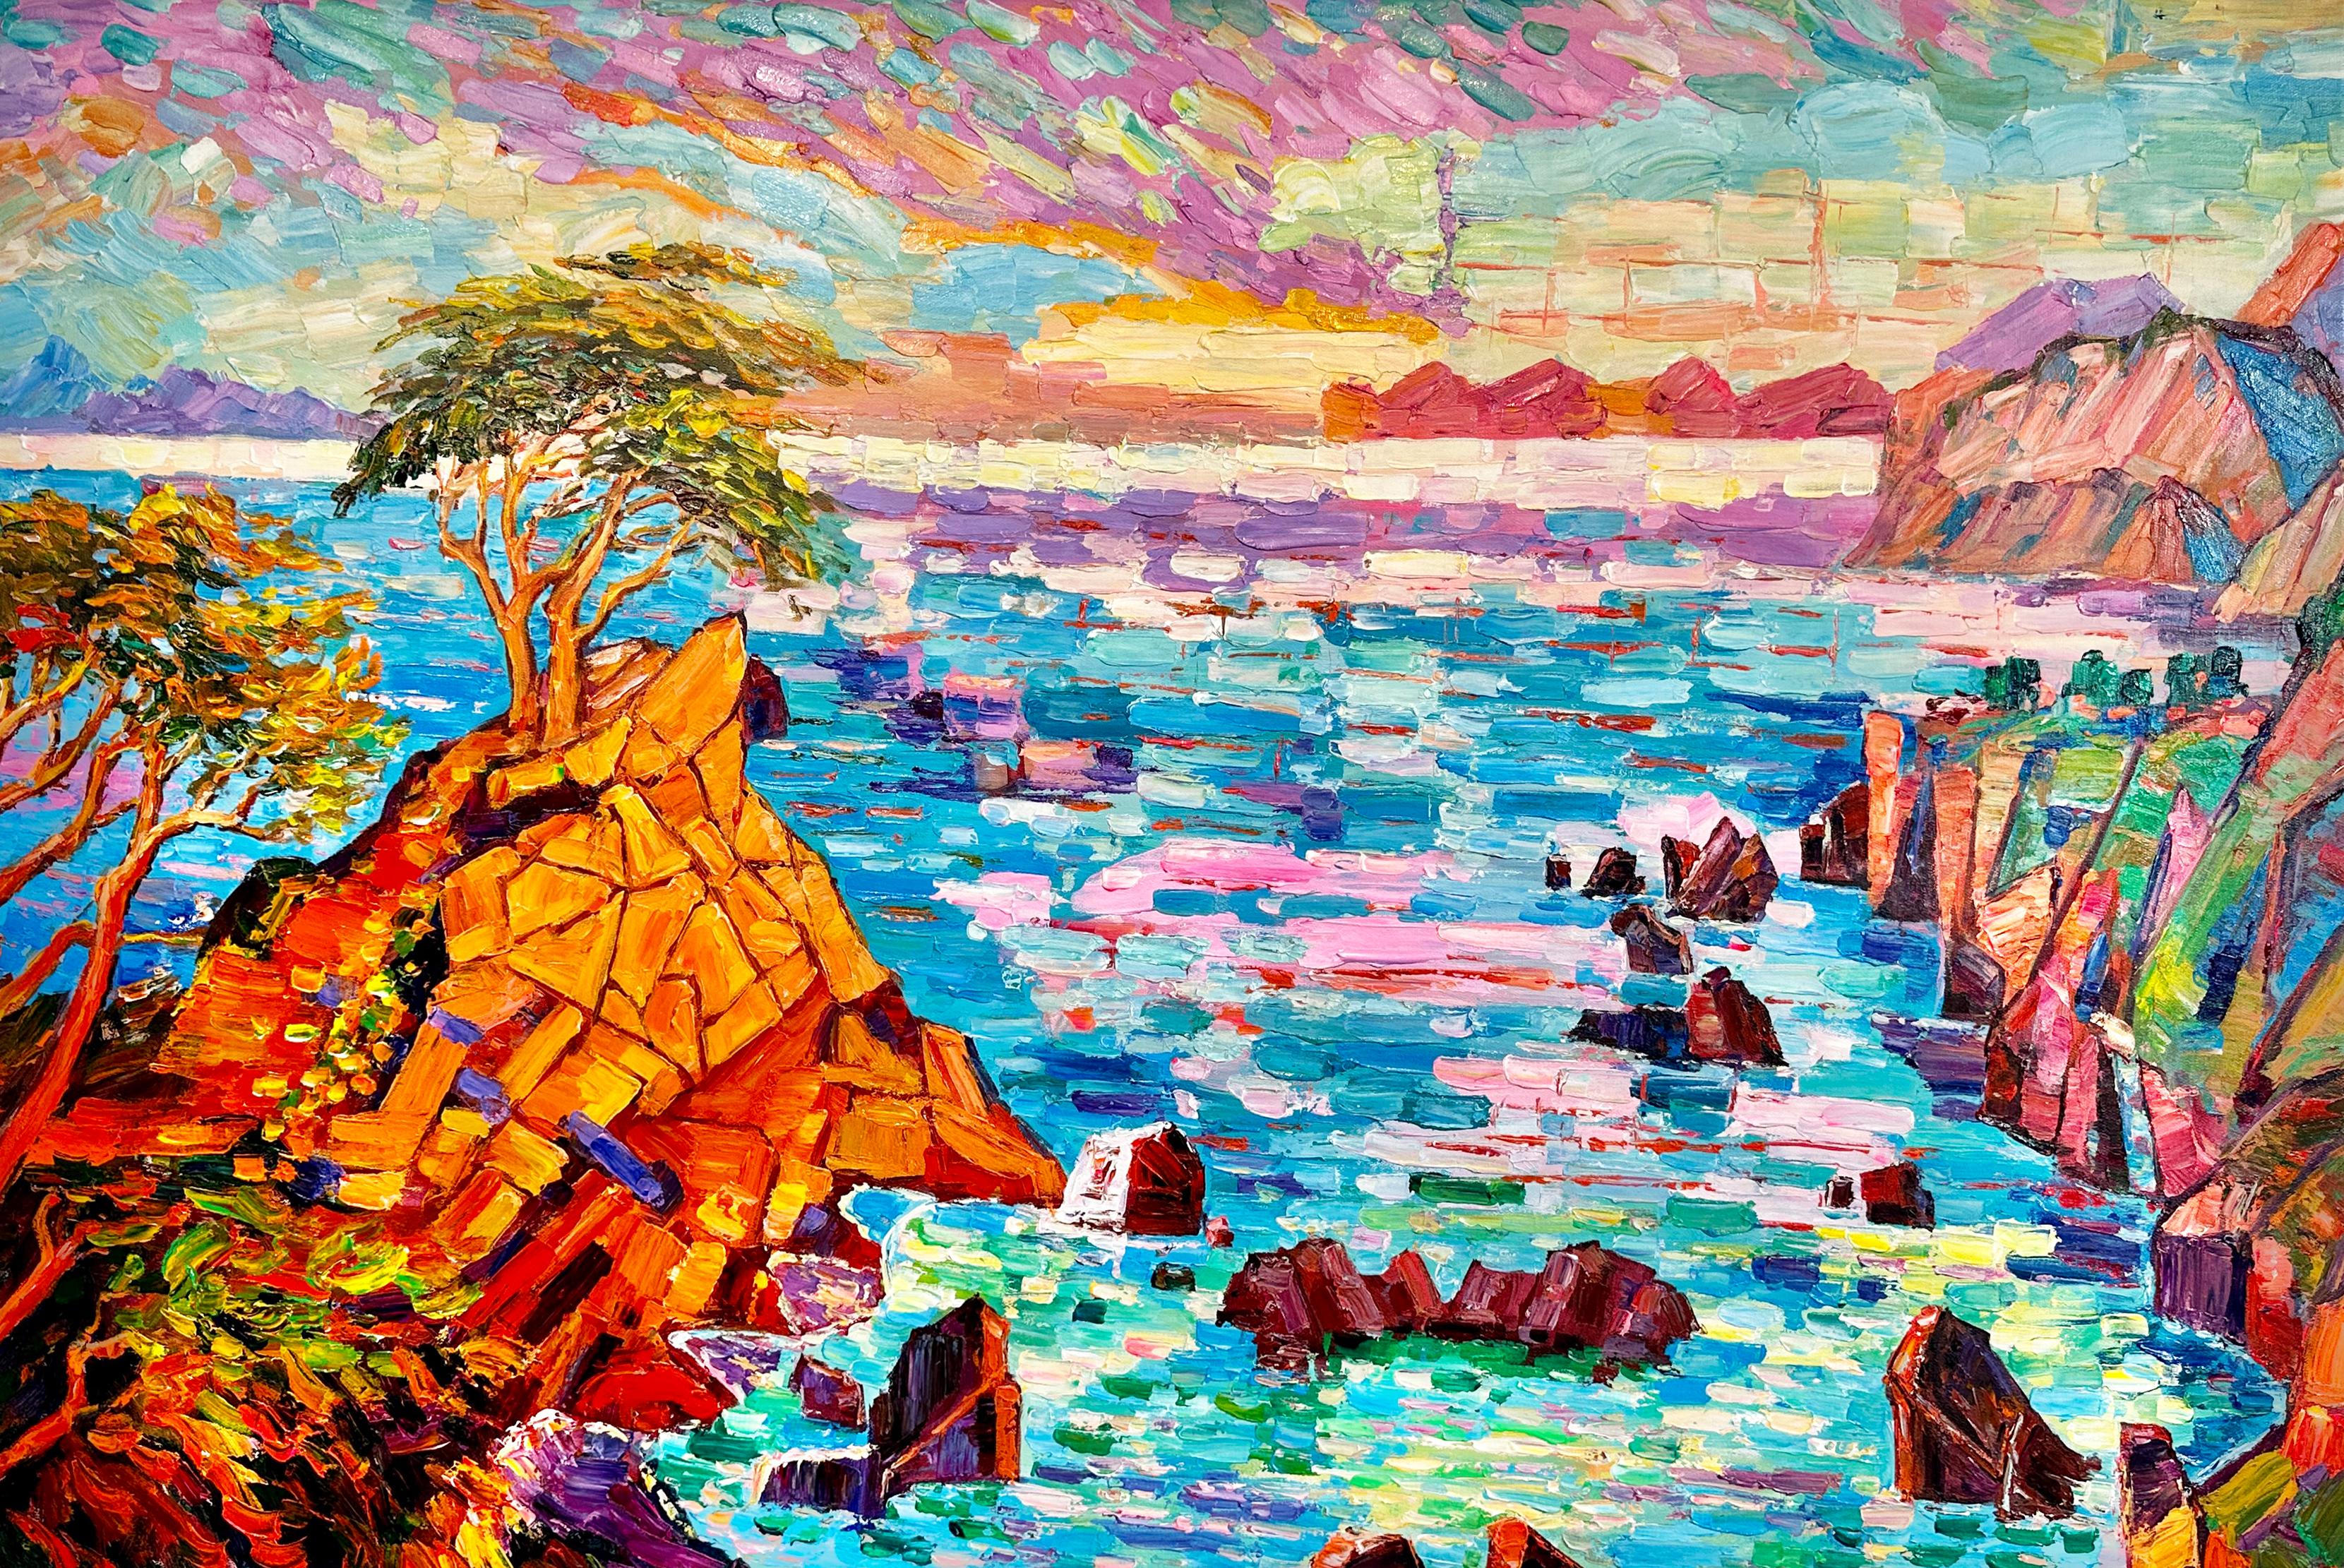 Within her impressionist landscape paintings, her experiences abroad truly come to light. These textural and abstracted paintings perfectly capture the vibrancy and movement included in a coastal sunset. This series differs from Husslein’s more